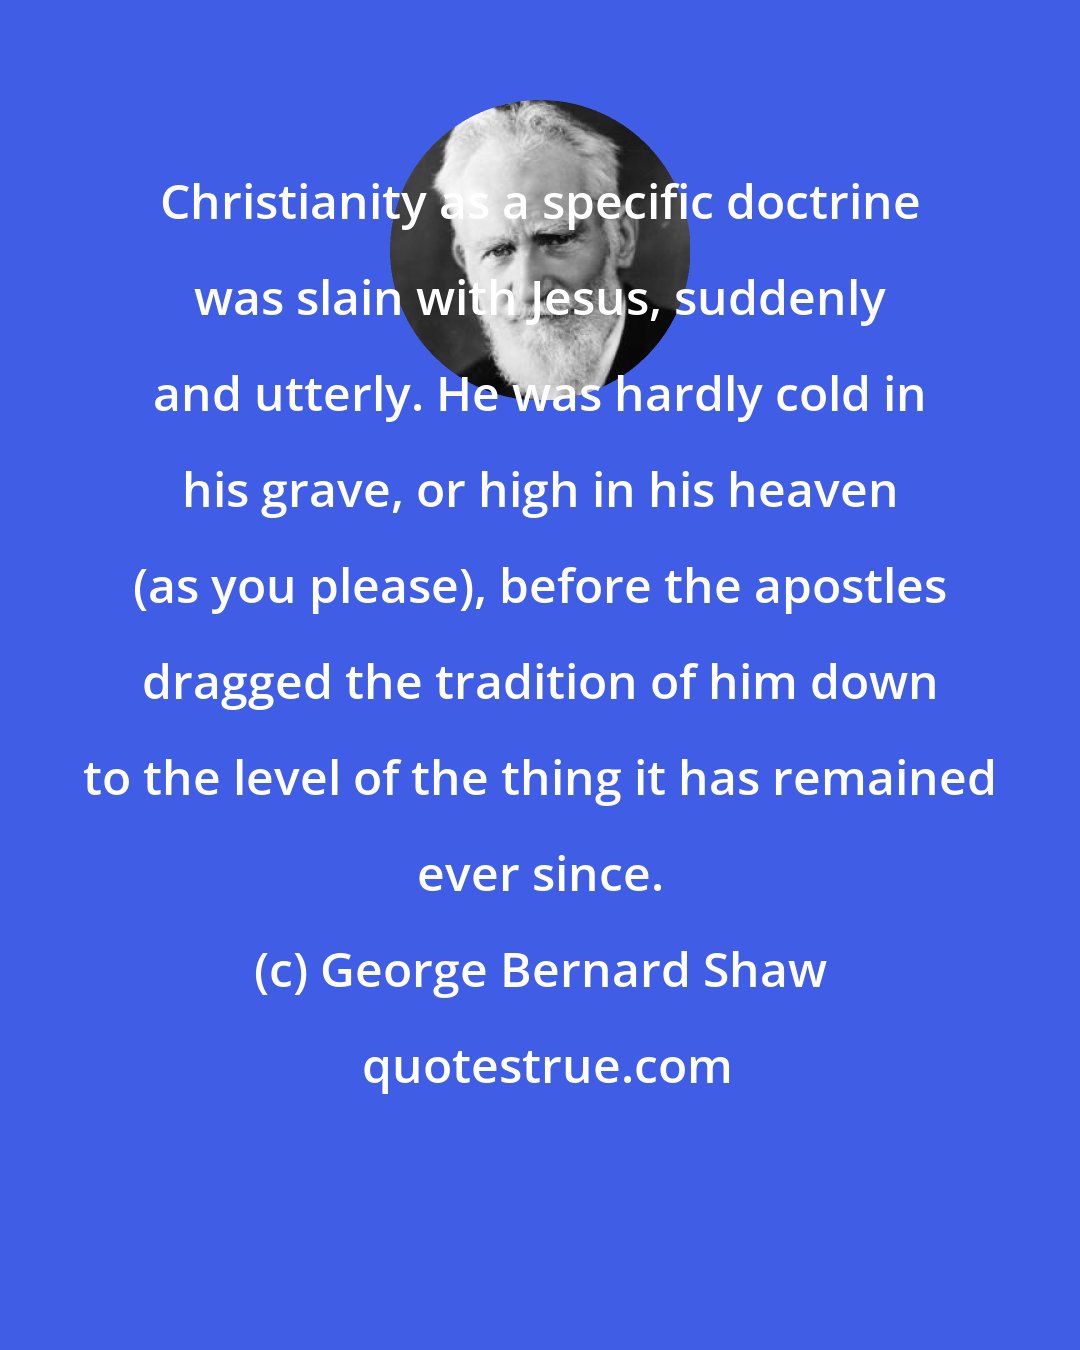 George Bernard Shaw: Christianity as a specific doctrine was slain with Jesus, suddenly and utterly. He was hardly cold in his grave, or high in his heaven (as you please), before the apostles dragged the tradition of him down to the level of the thing it has remained ever since.